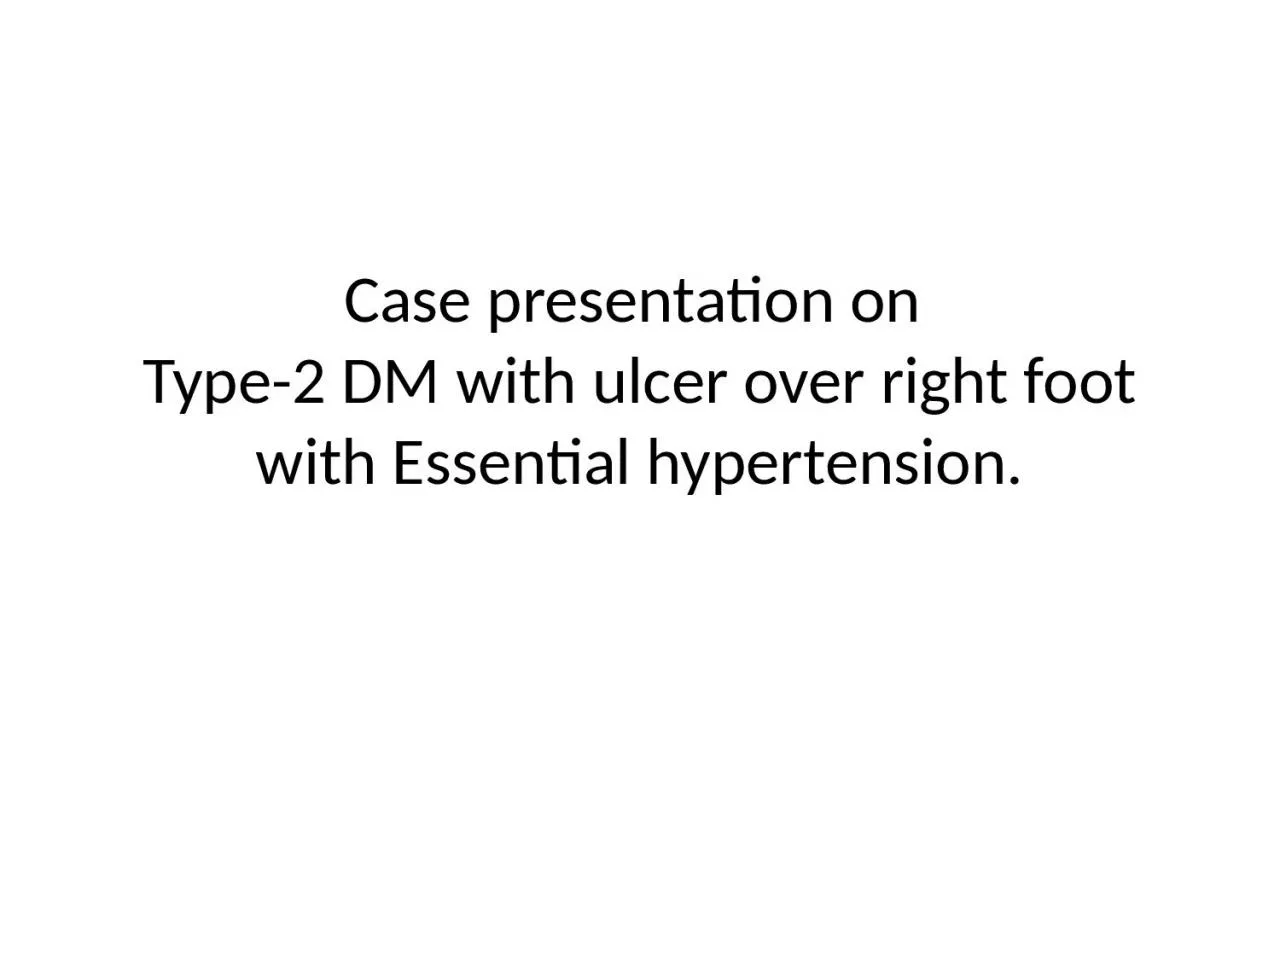 Case presentation on  Type-2 DM with ulcer over right foot with Essential hypertension.